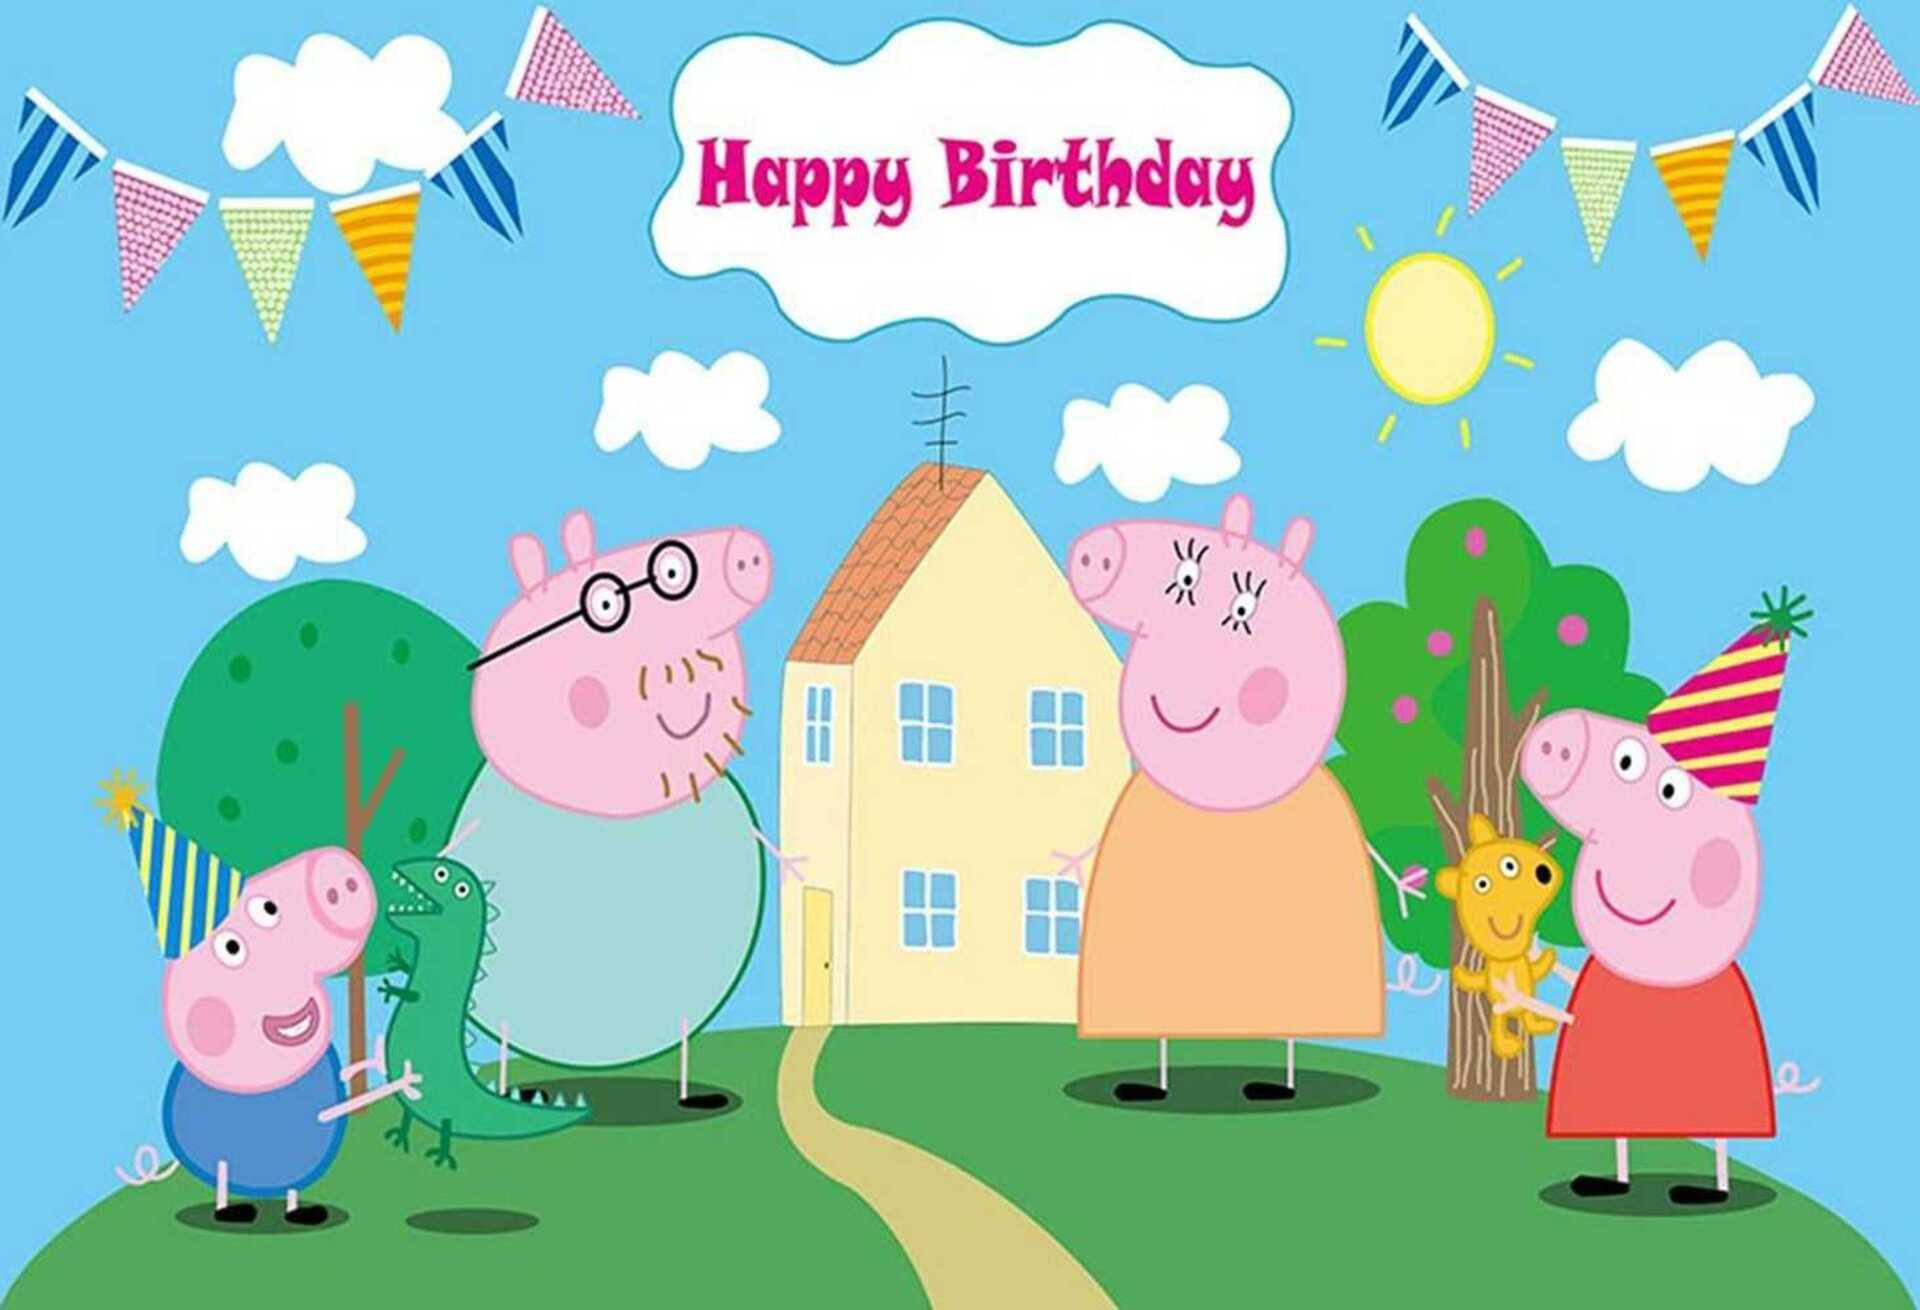 A Happy Birthday Greeting From Peppa Pig's House Background